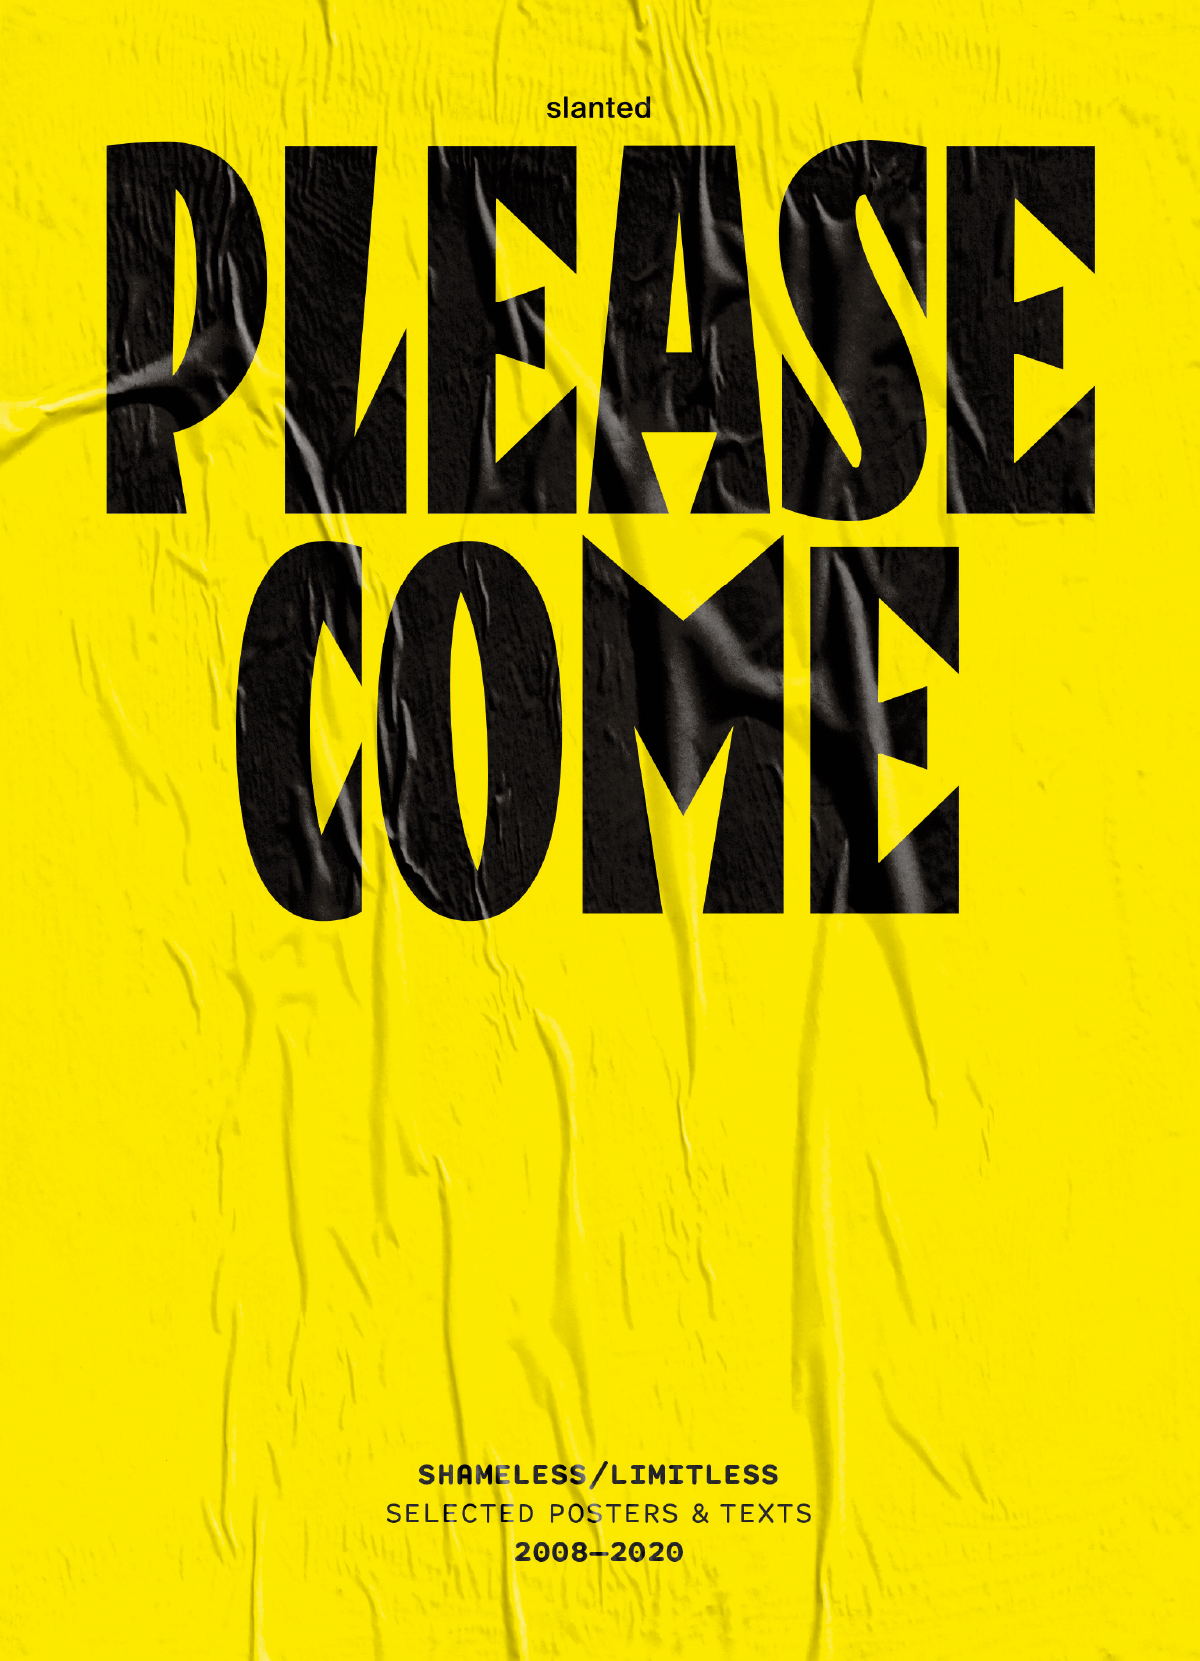 Please Come: Shameless / Limitless—Selected Posters & Texts 2008–2020